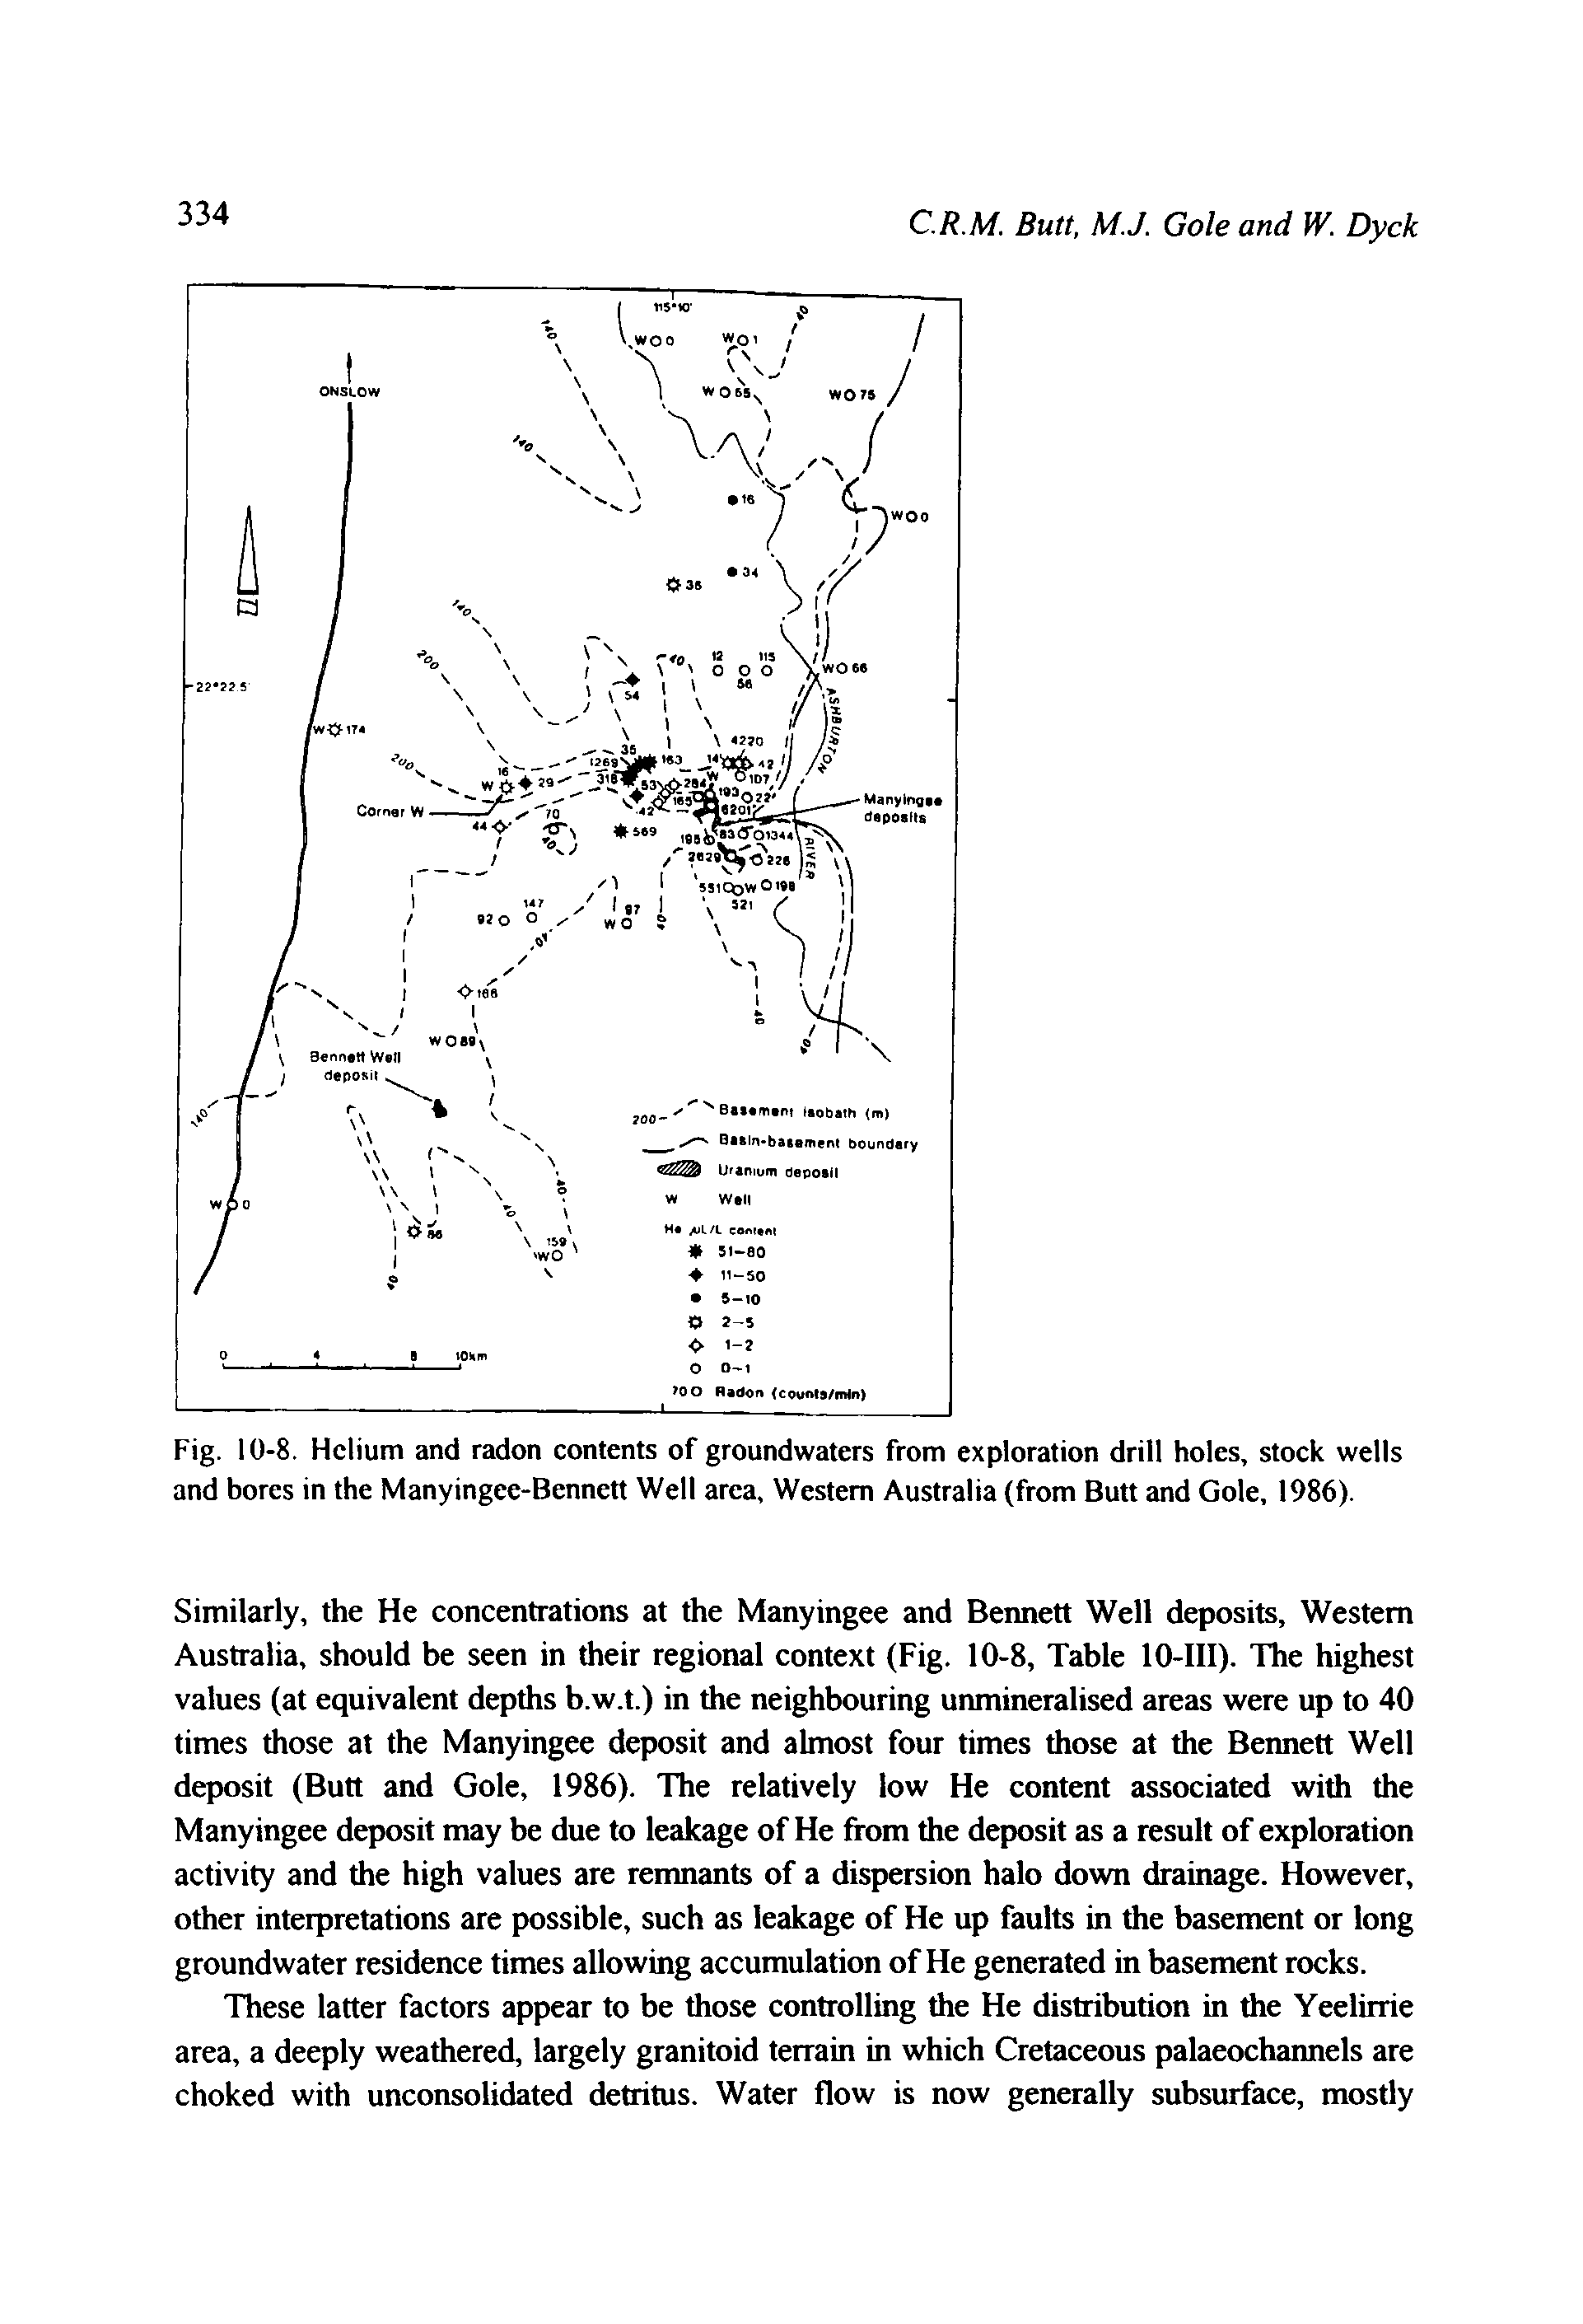 Fig. 10-8. Helium and radon contents of groundwaters from exploration drill holes, stock wells and bores in the Manyingee-Bennett Well area. Western Australia (from Butt and Gole, 1986).